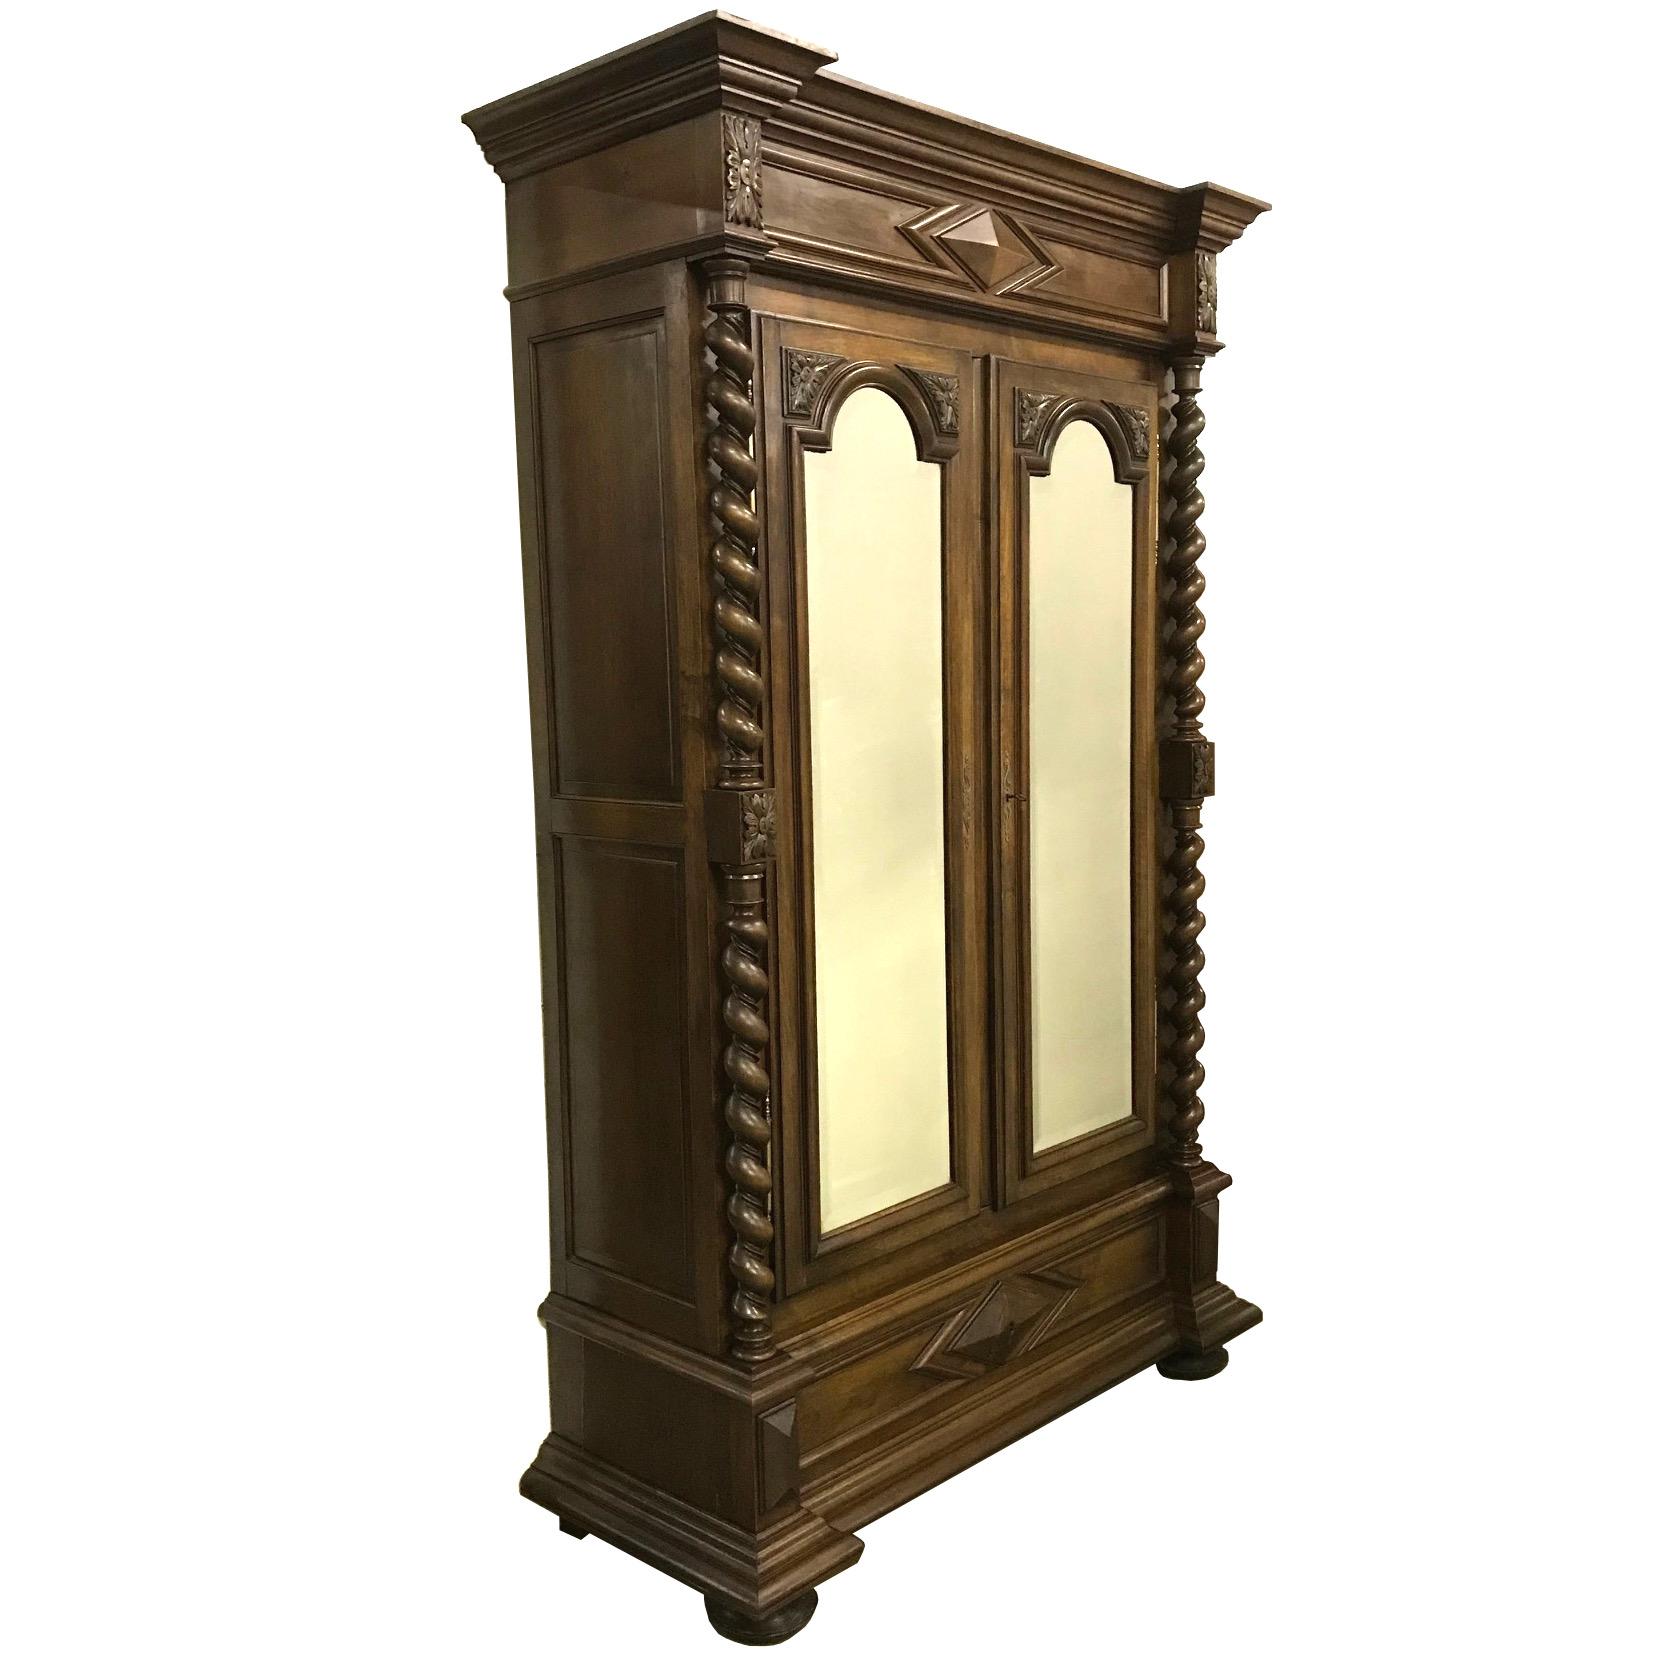 This amazing large antique wardrobe hails from France. Crafted there sometime around the year 1880, it houses a huge area for all your clothing storage needs or would make a good bookcase if you cut shelves for the inside. A large drawer on the